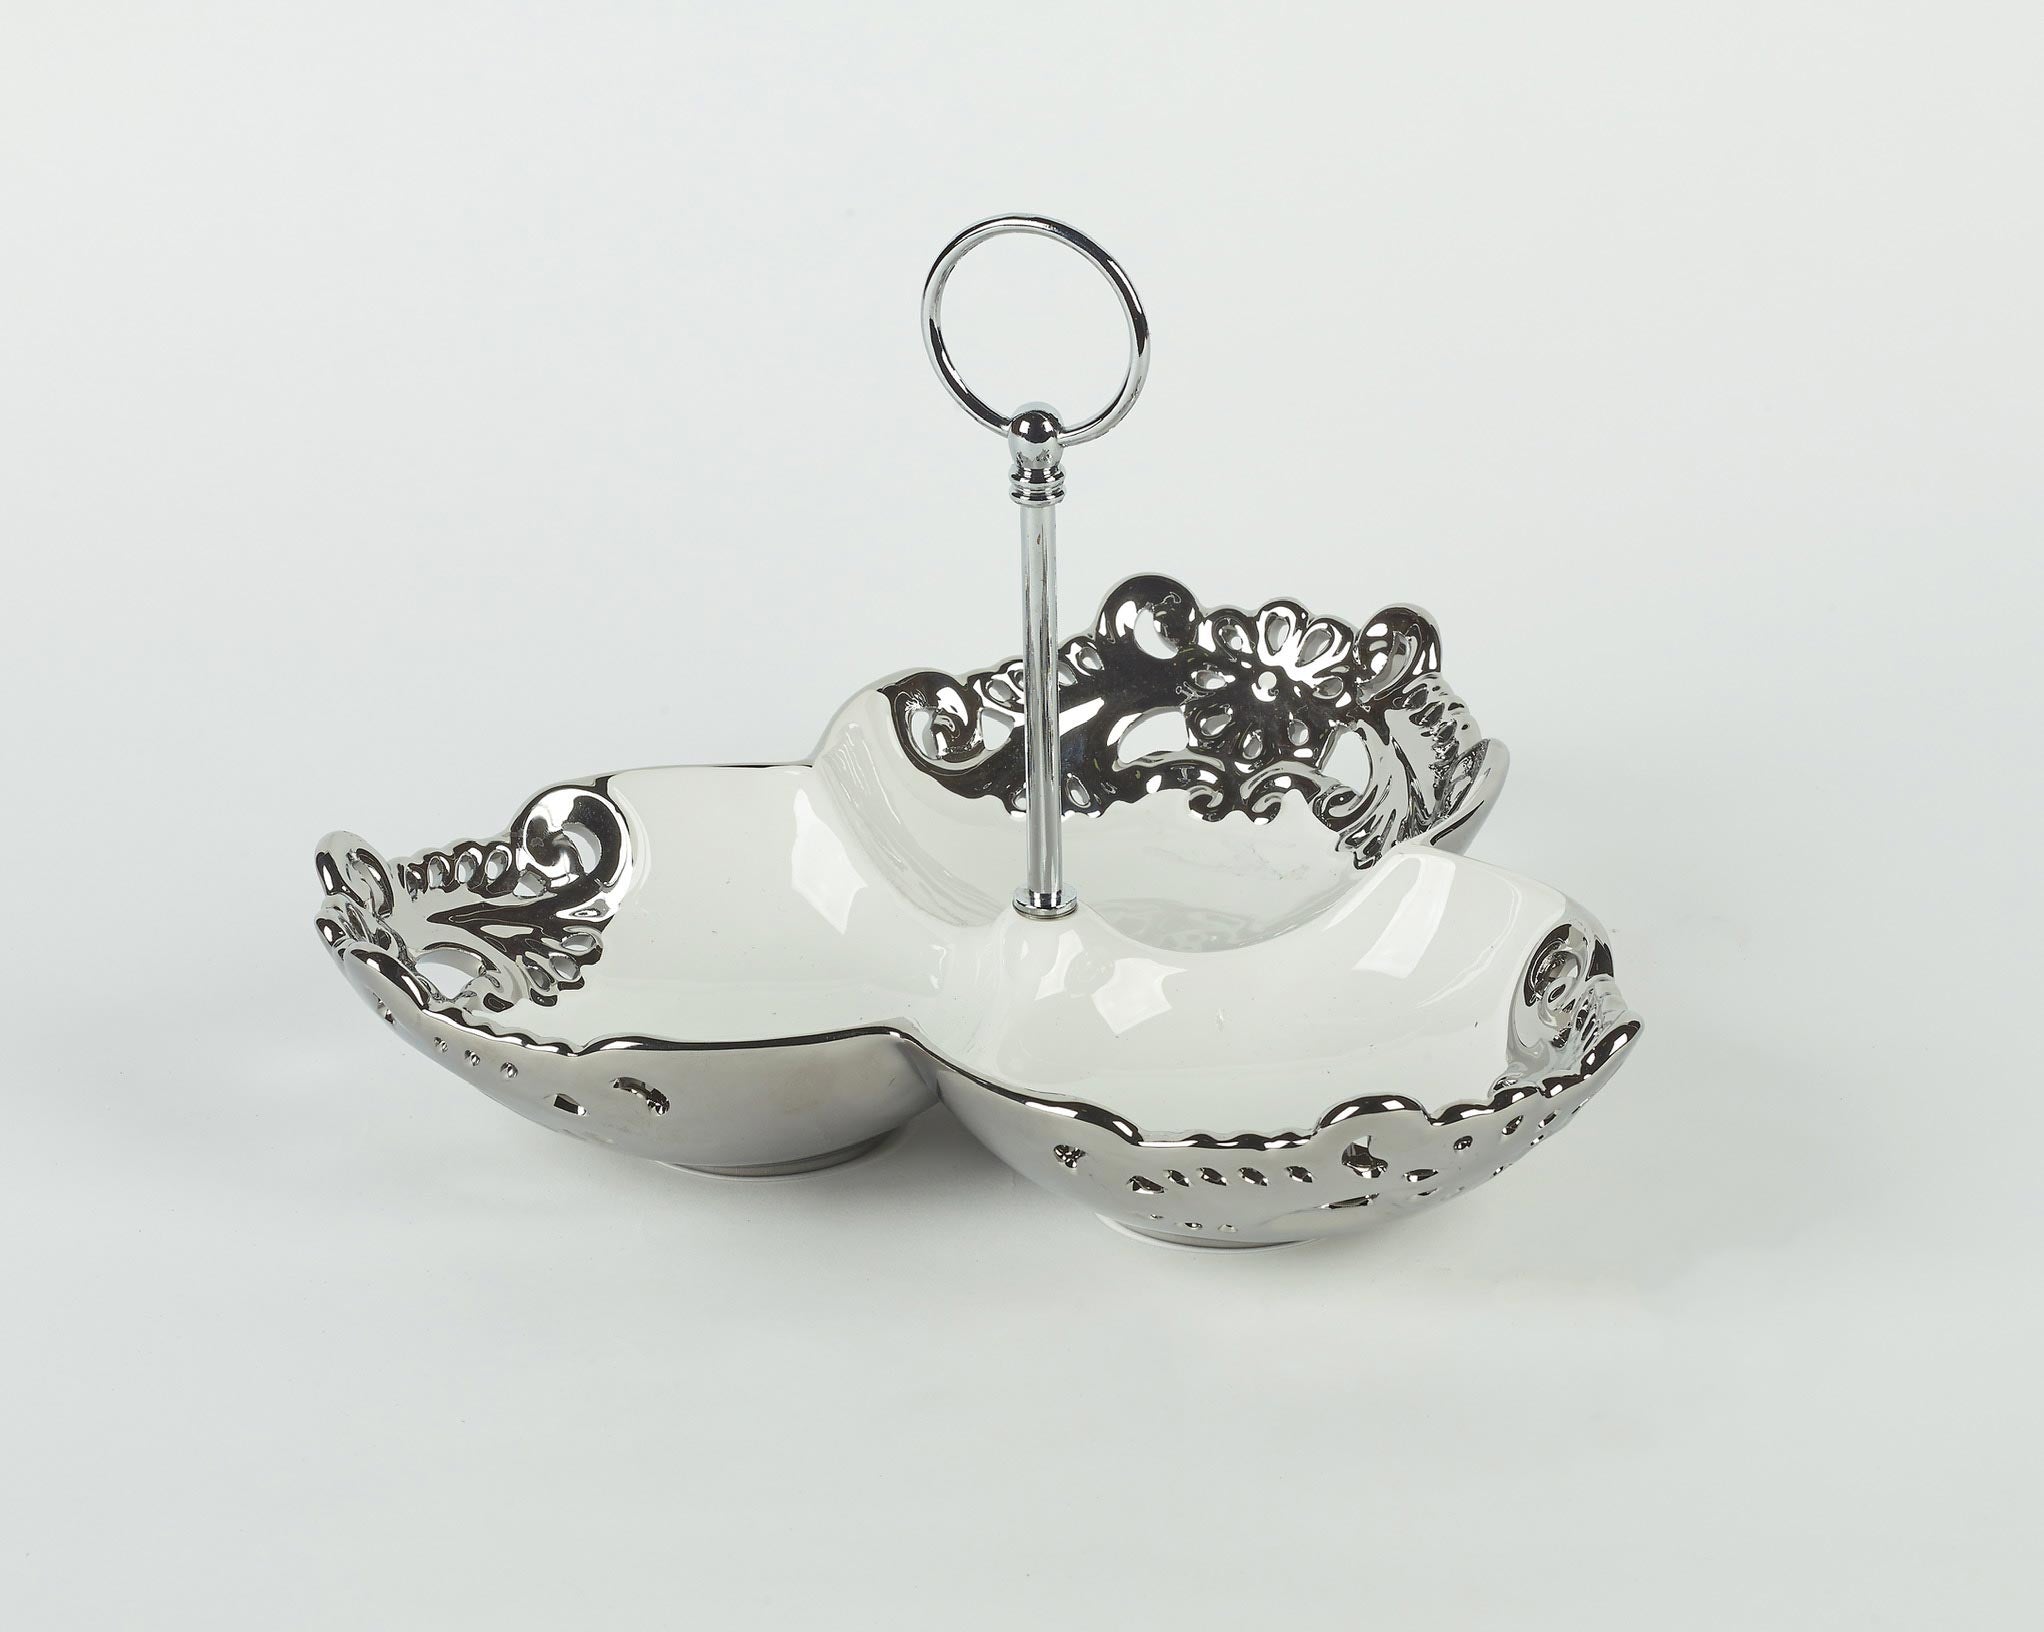 SILVER CERAMIC 3 SECTIONAL BOWL